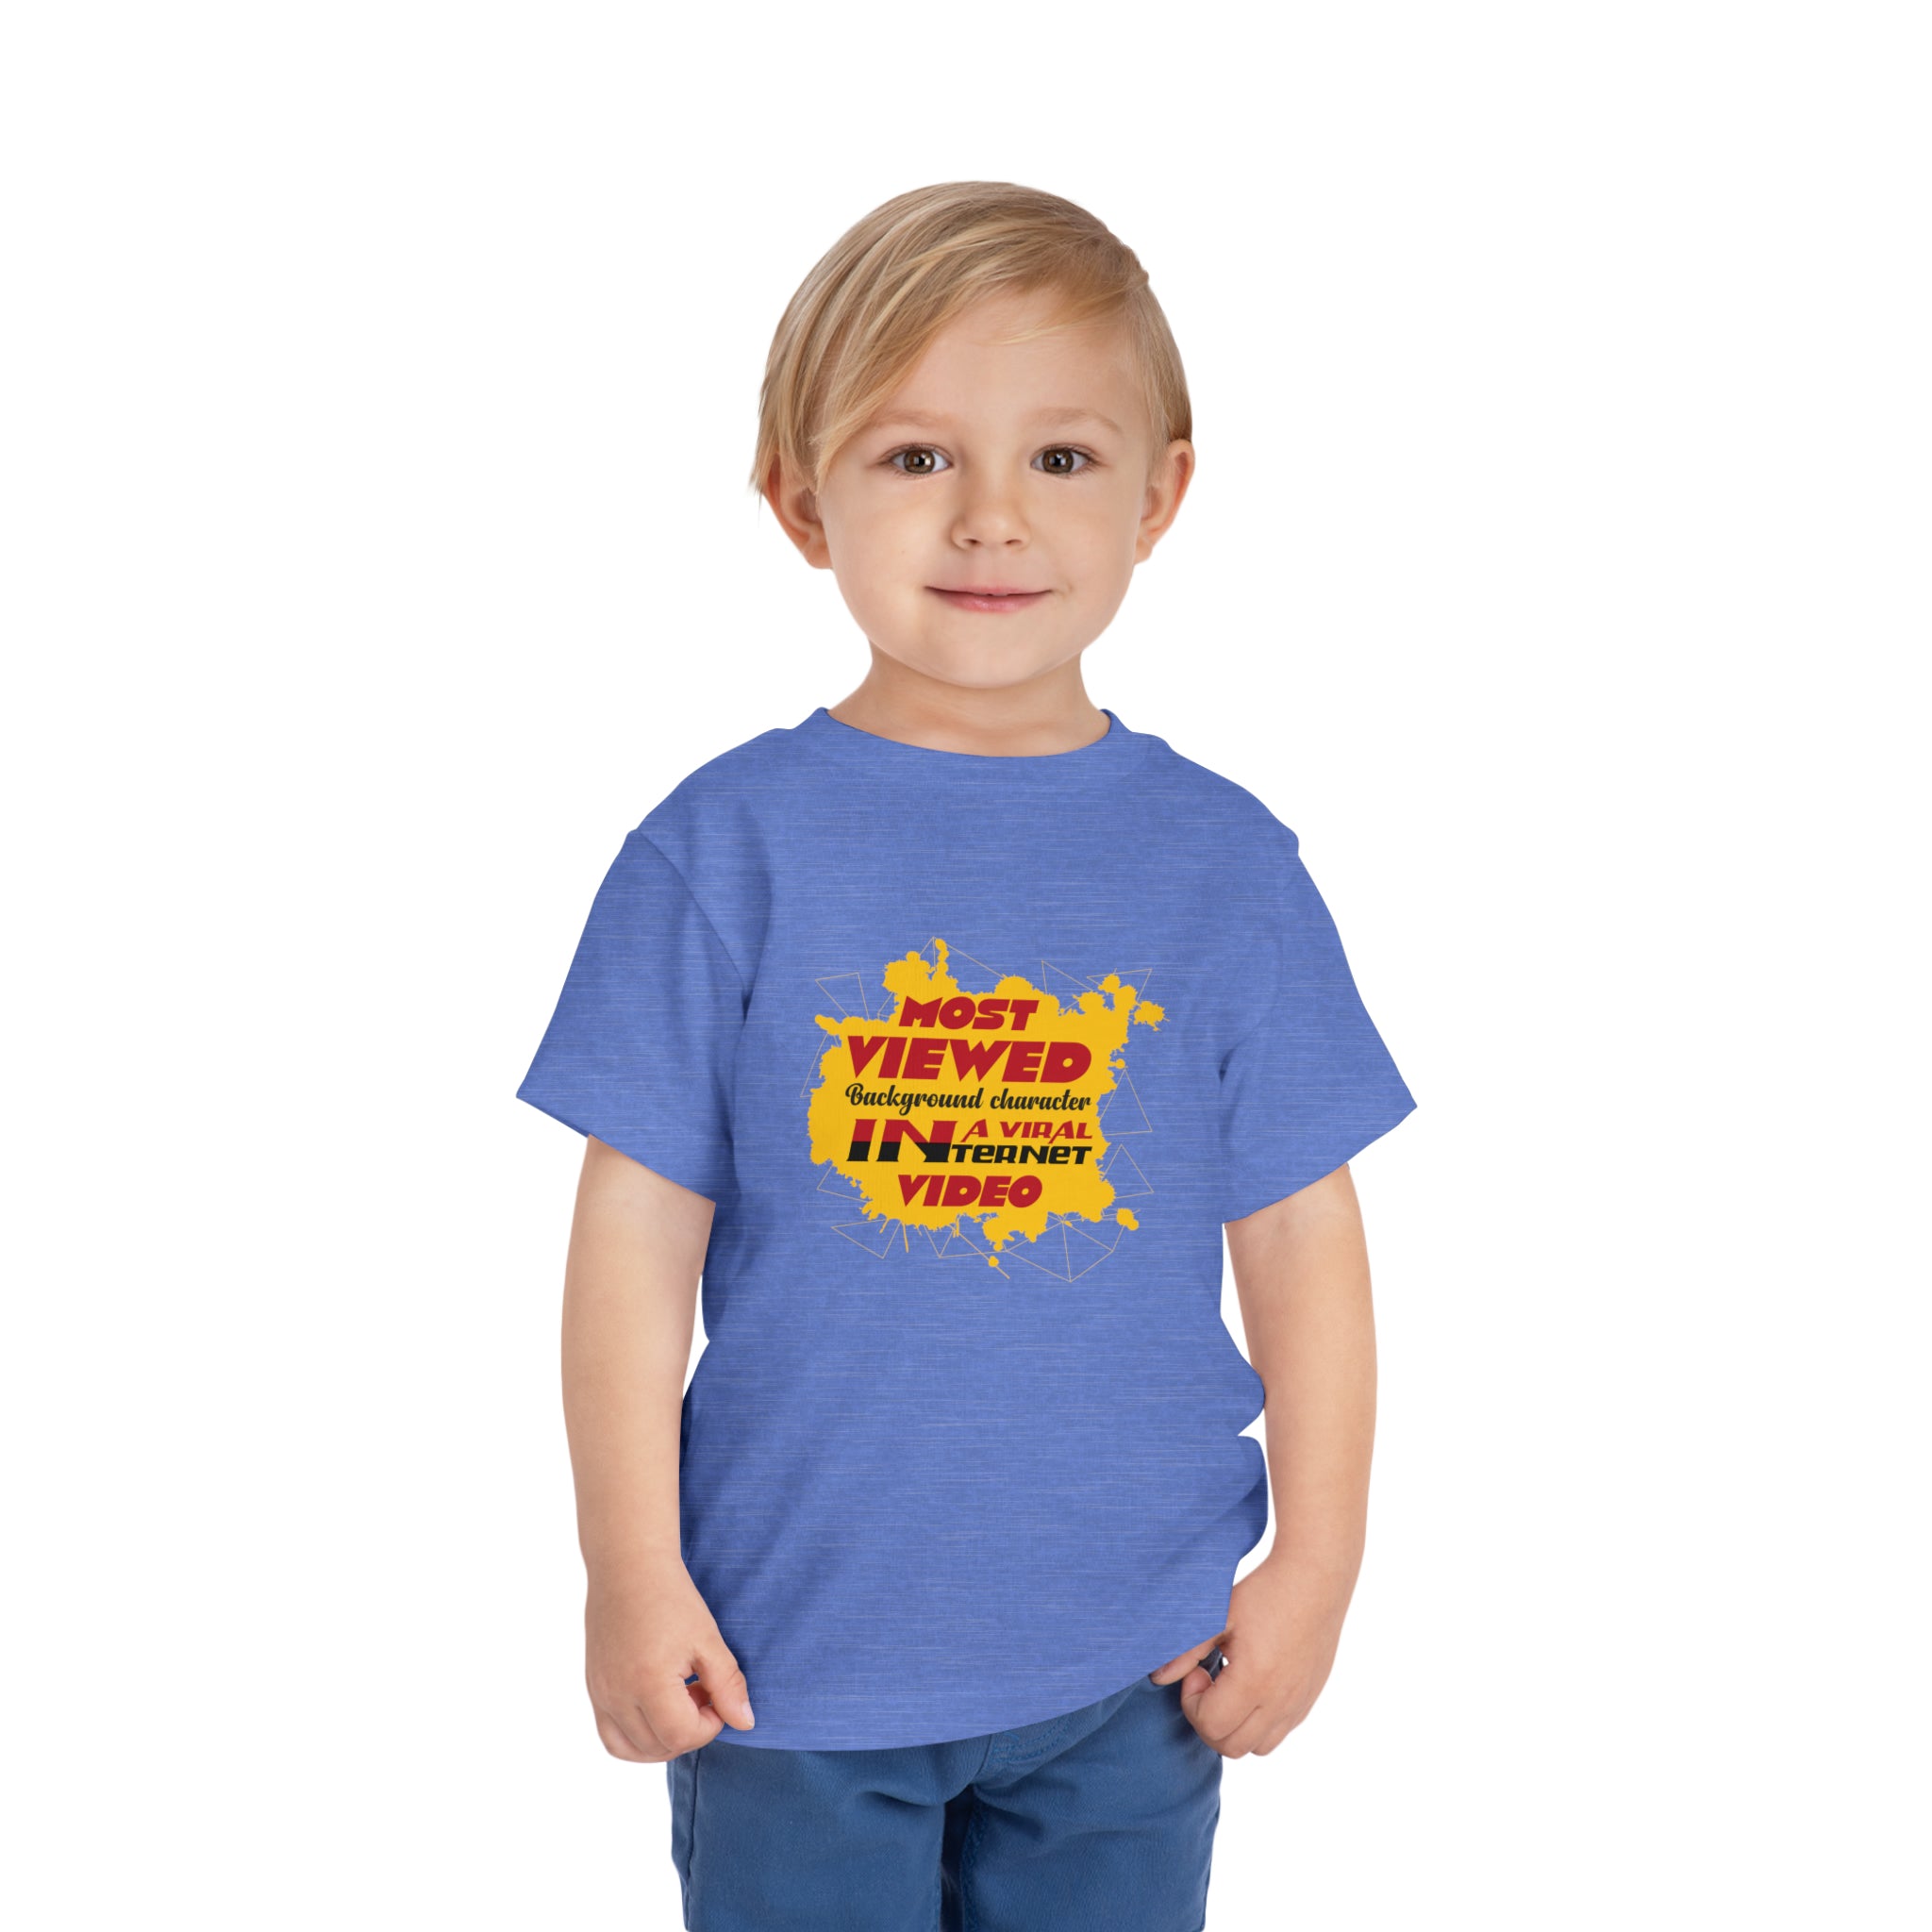 Background Character Challenge [Toddler Tee]